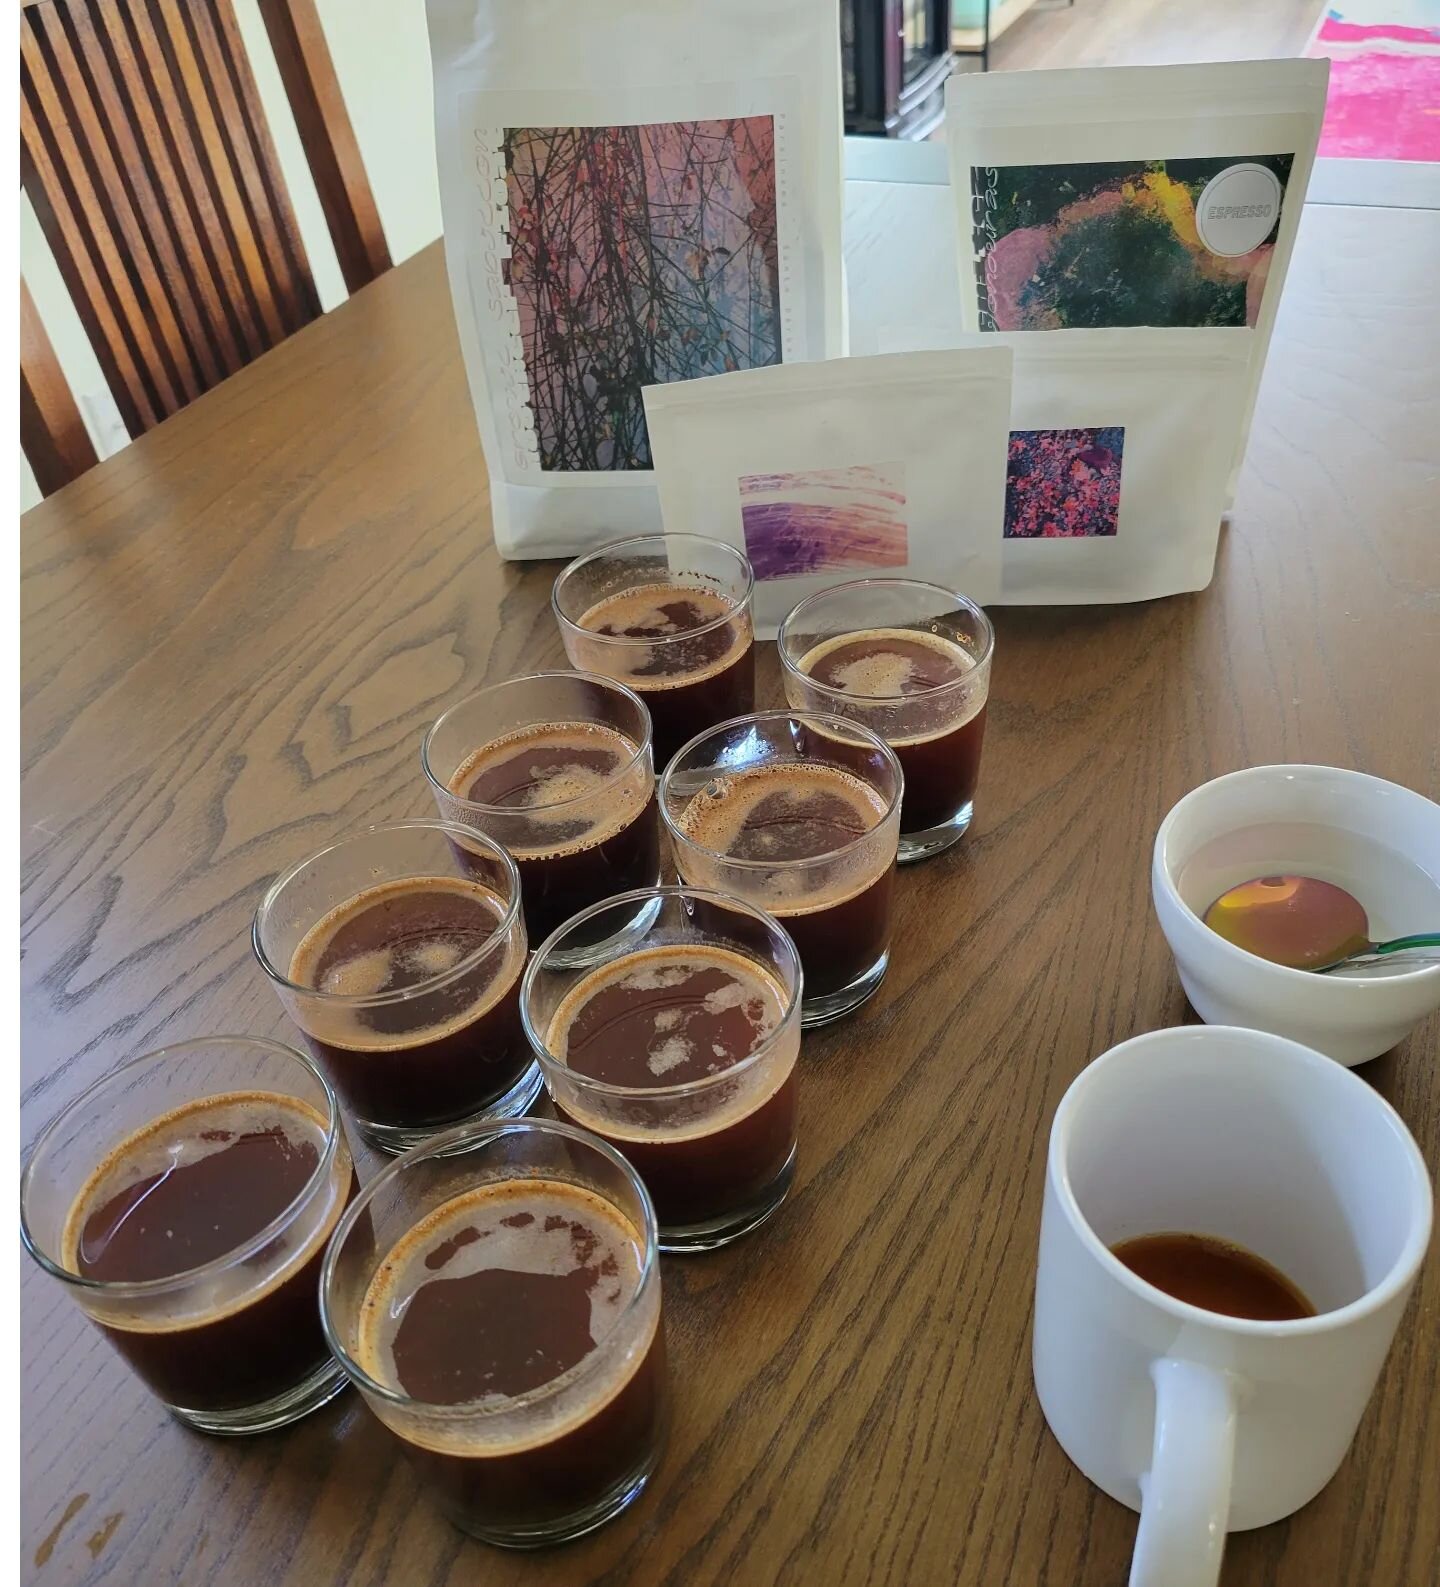 Earlier this week we were cupping coffee from @enjoylunacoffee - and we're excited to feature them at our next pop up!

Nerd time: You might think we cupped 8 coffees at once, and sometimes we do! But this time it was 4, we like to double up each cof